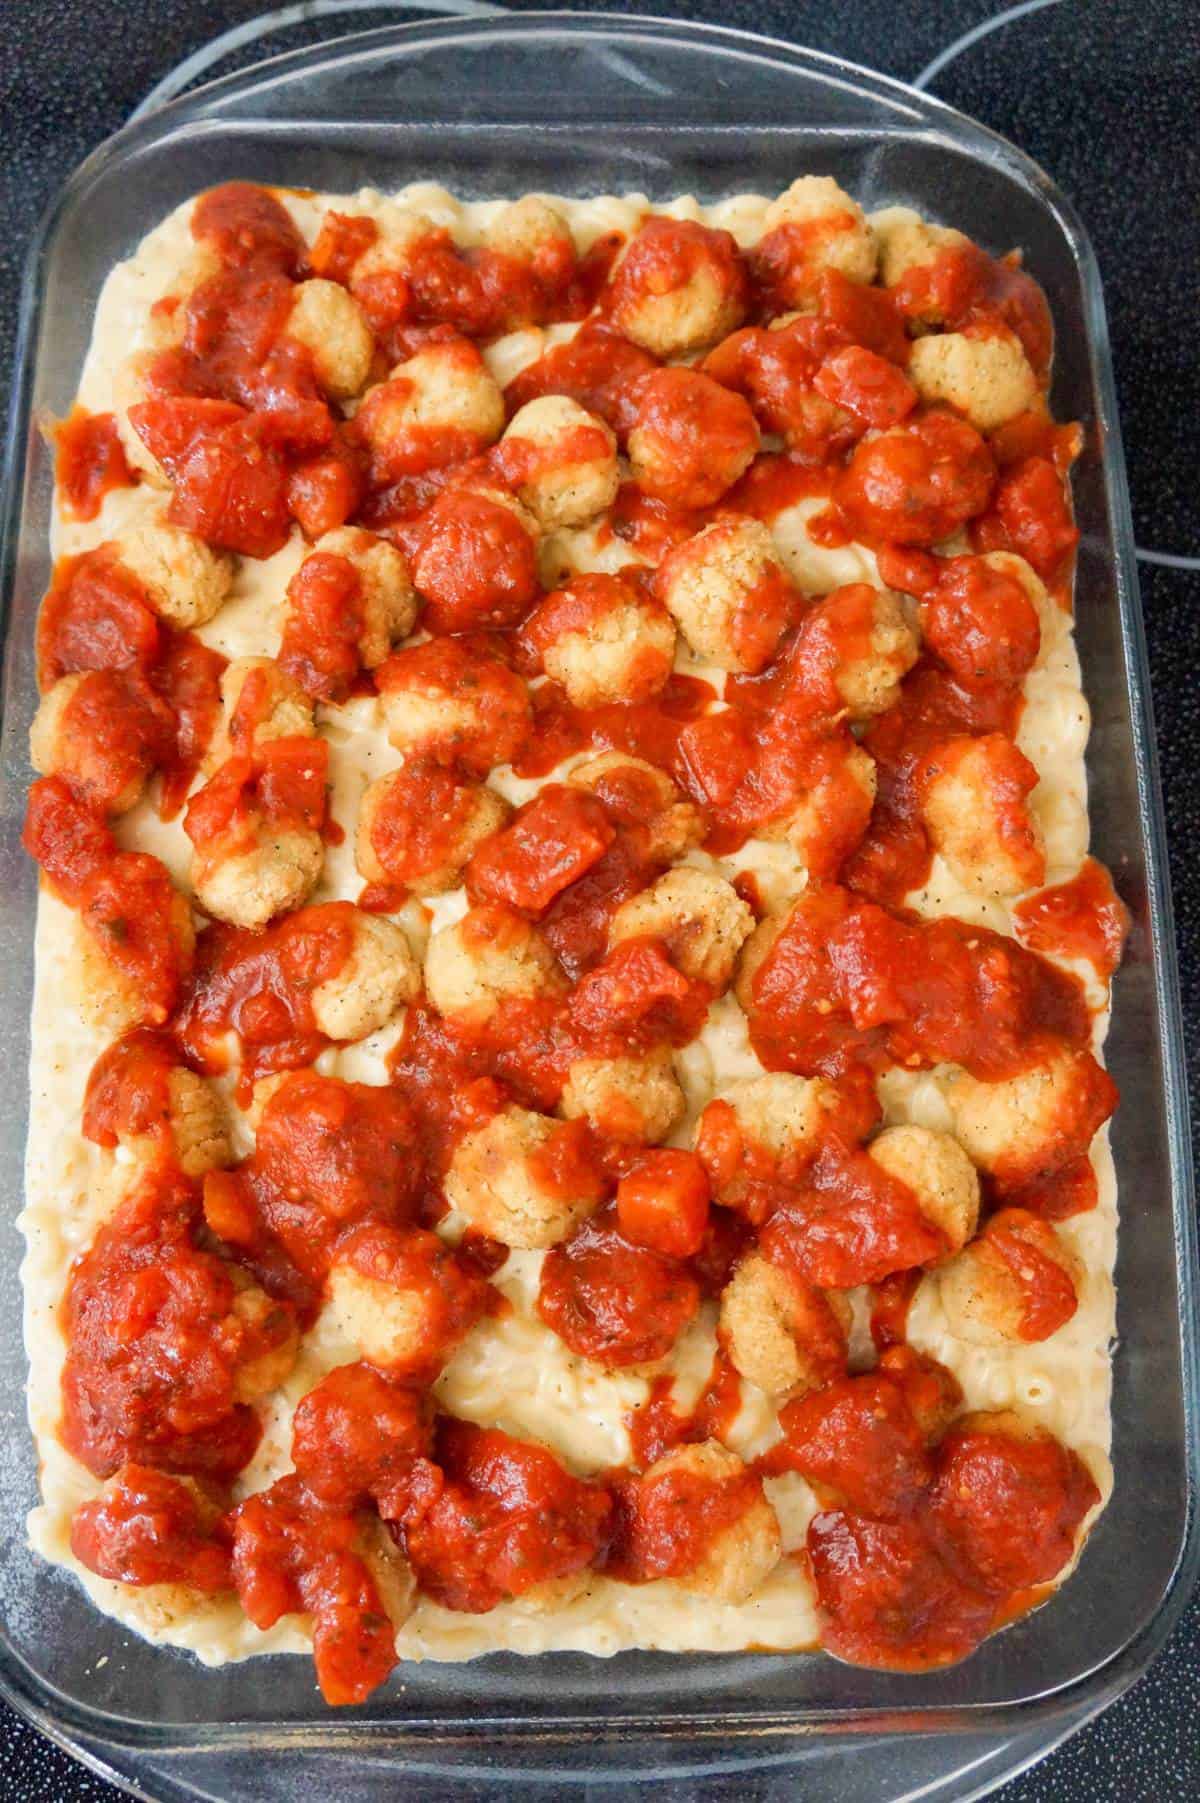 marinara sauce and popcorn chicken on top of mac and cheese in a baking dish